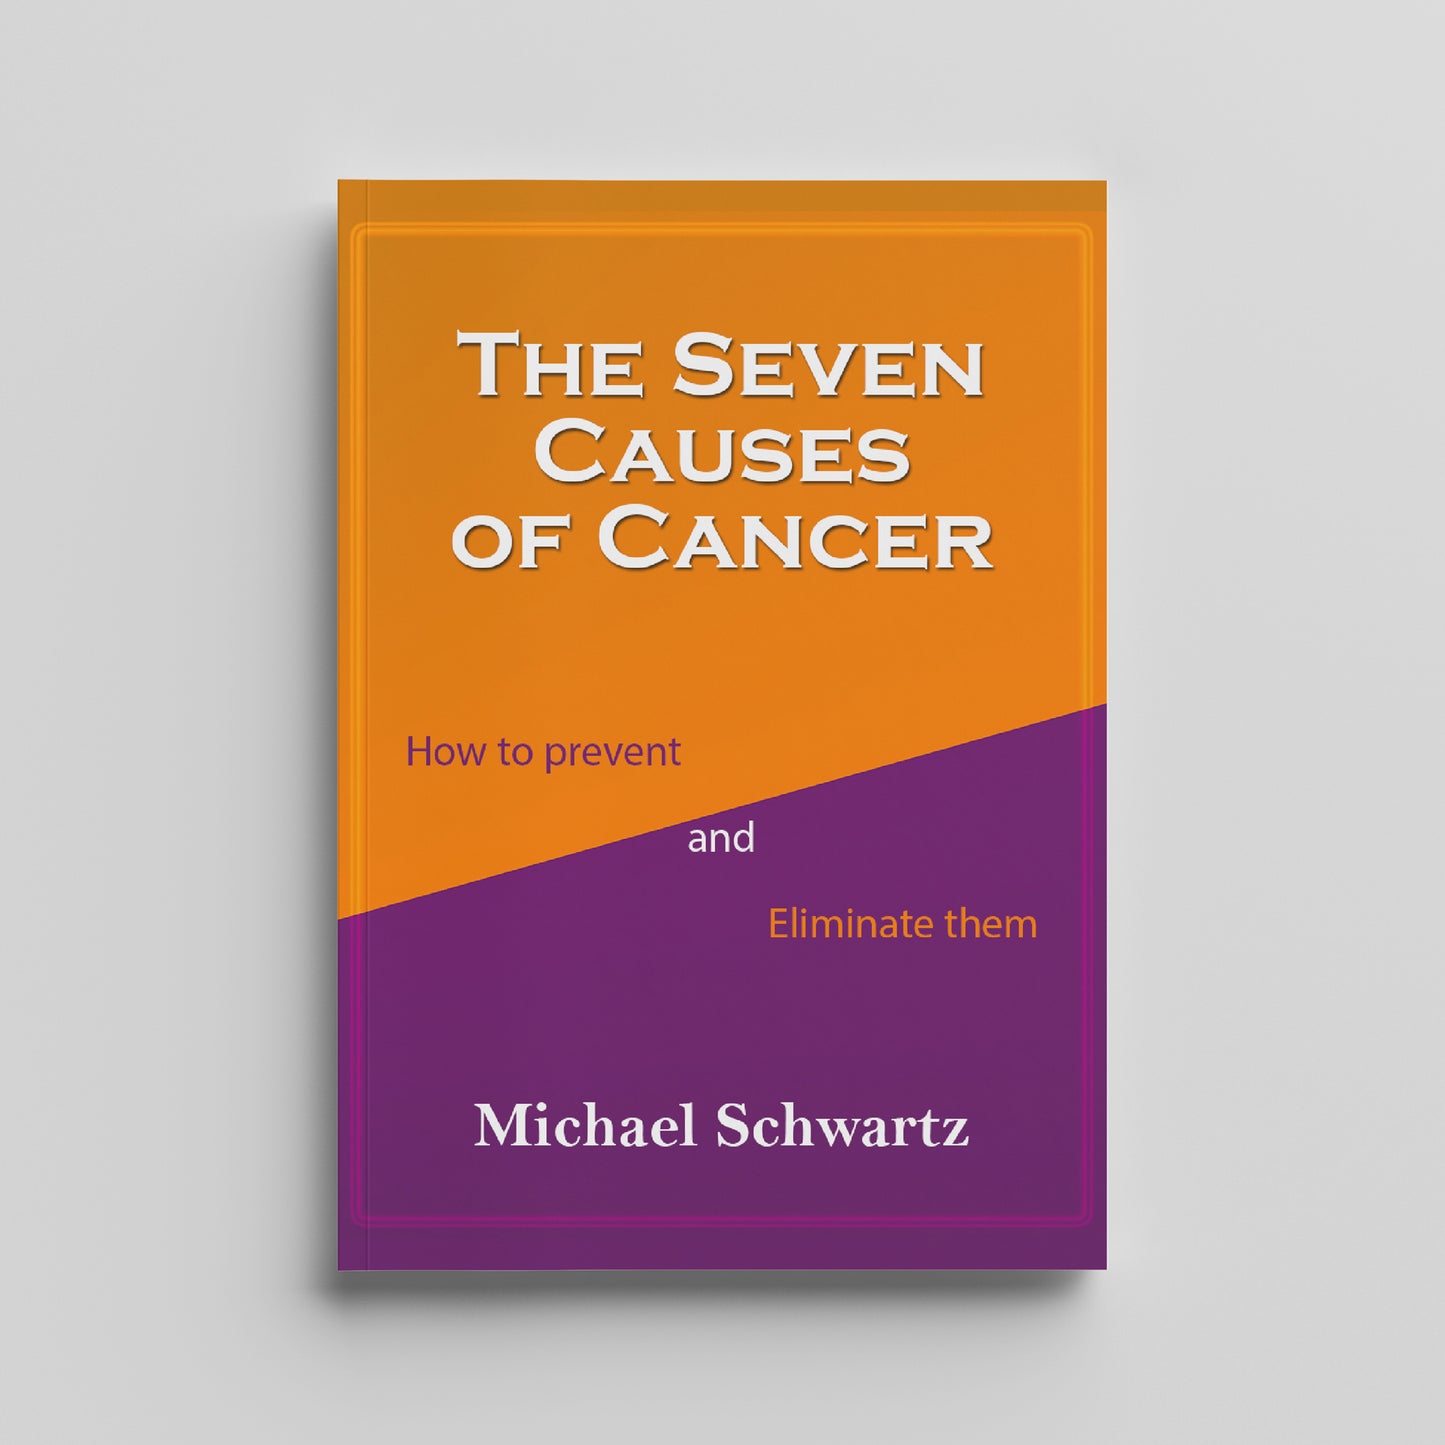 The 7 Causes of Cancer: How to Prevent and Eliminate Them